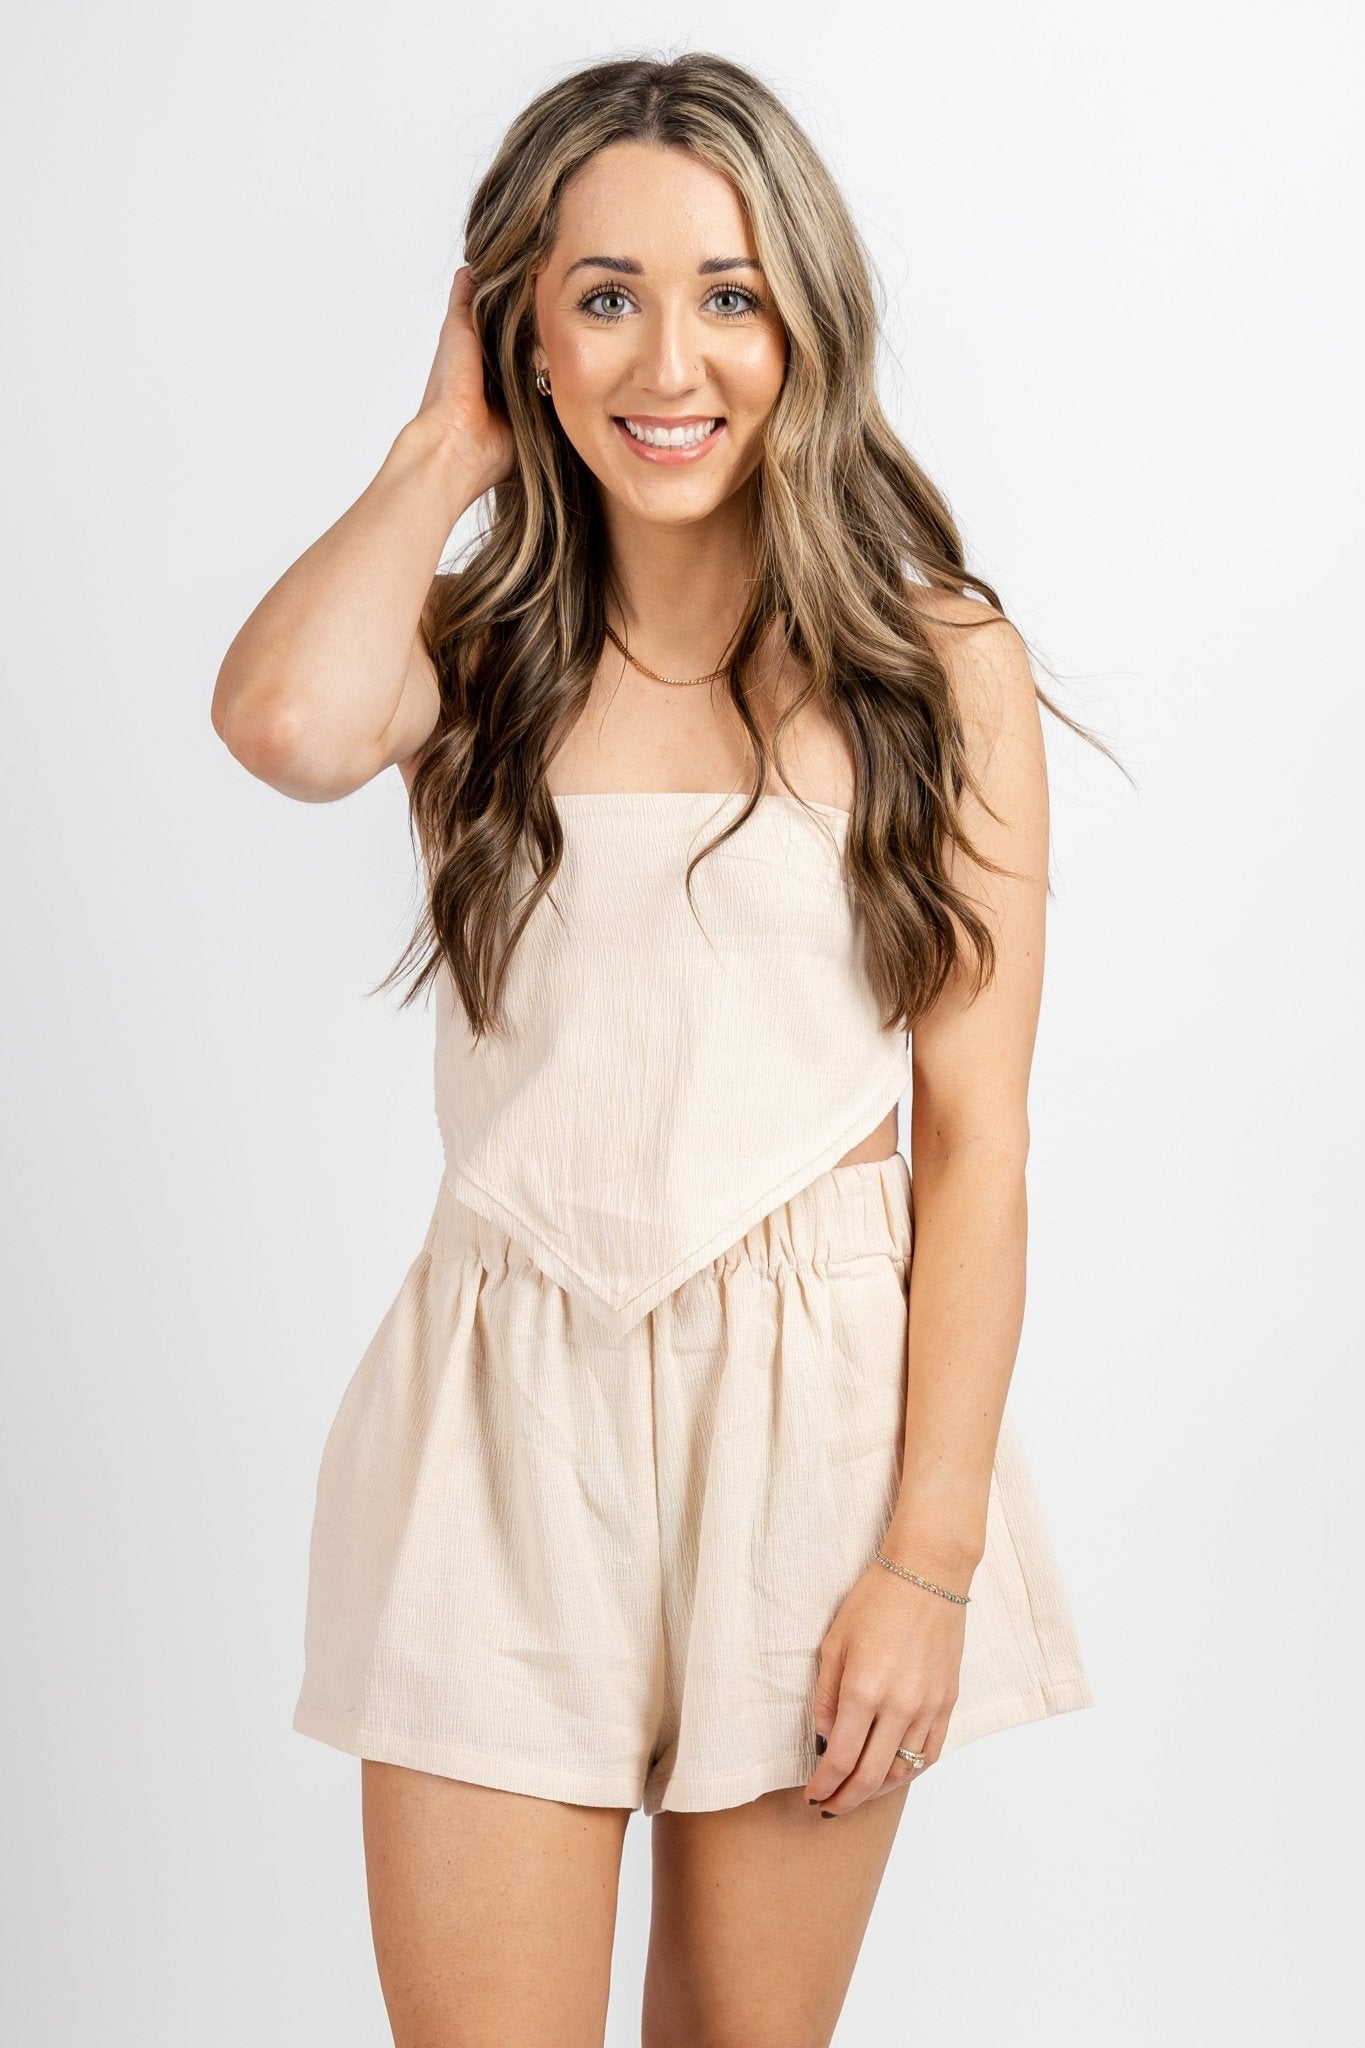 Cropped gauze top light taupe - Cute Top - Fun Vacay Basics at Lush Fashion Lounge Boutique in Oklahoma City